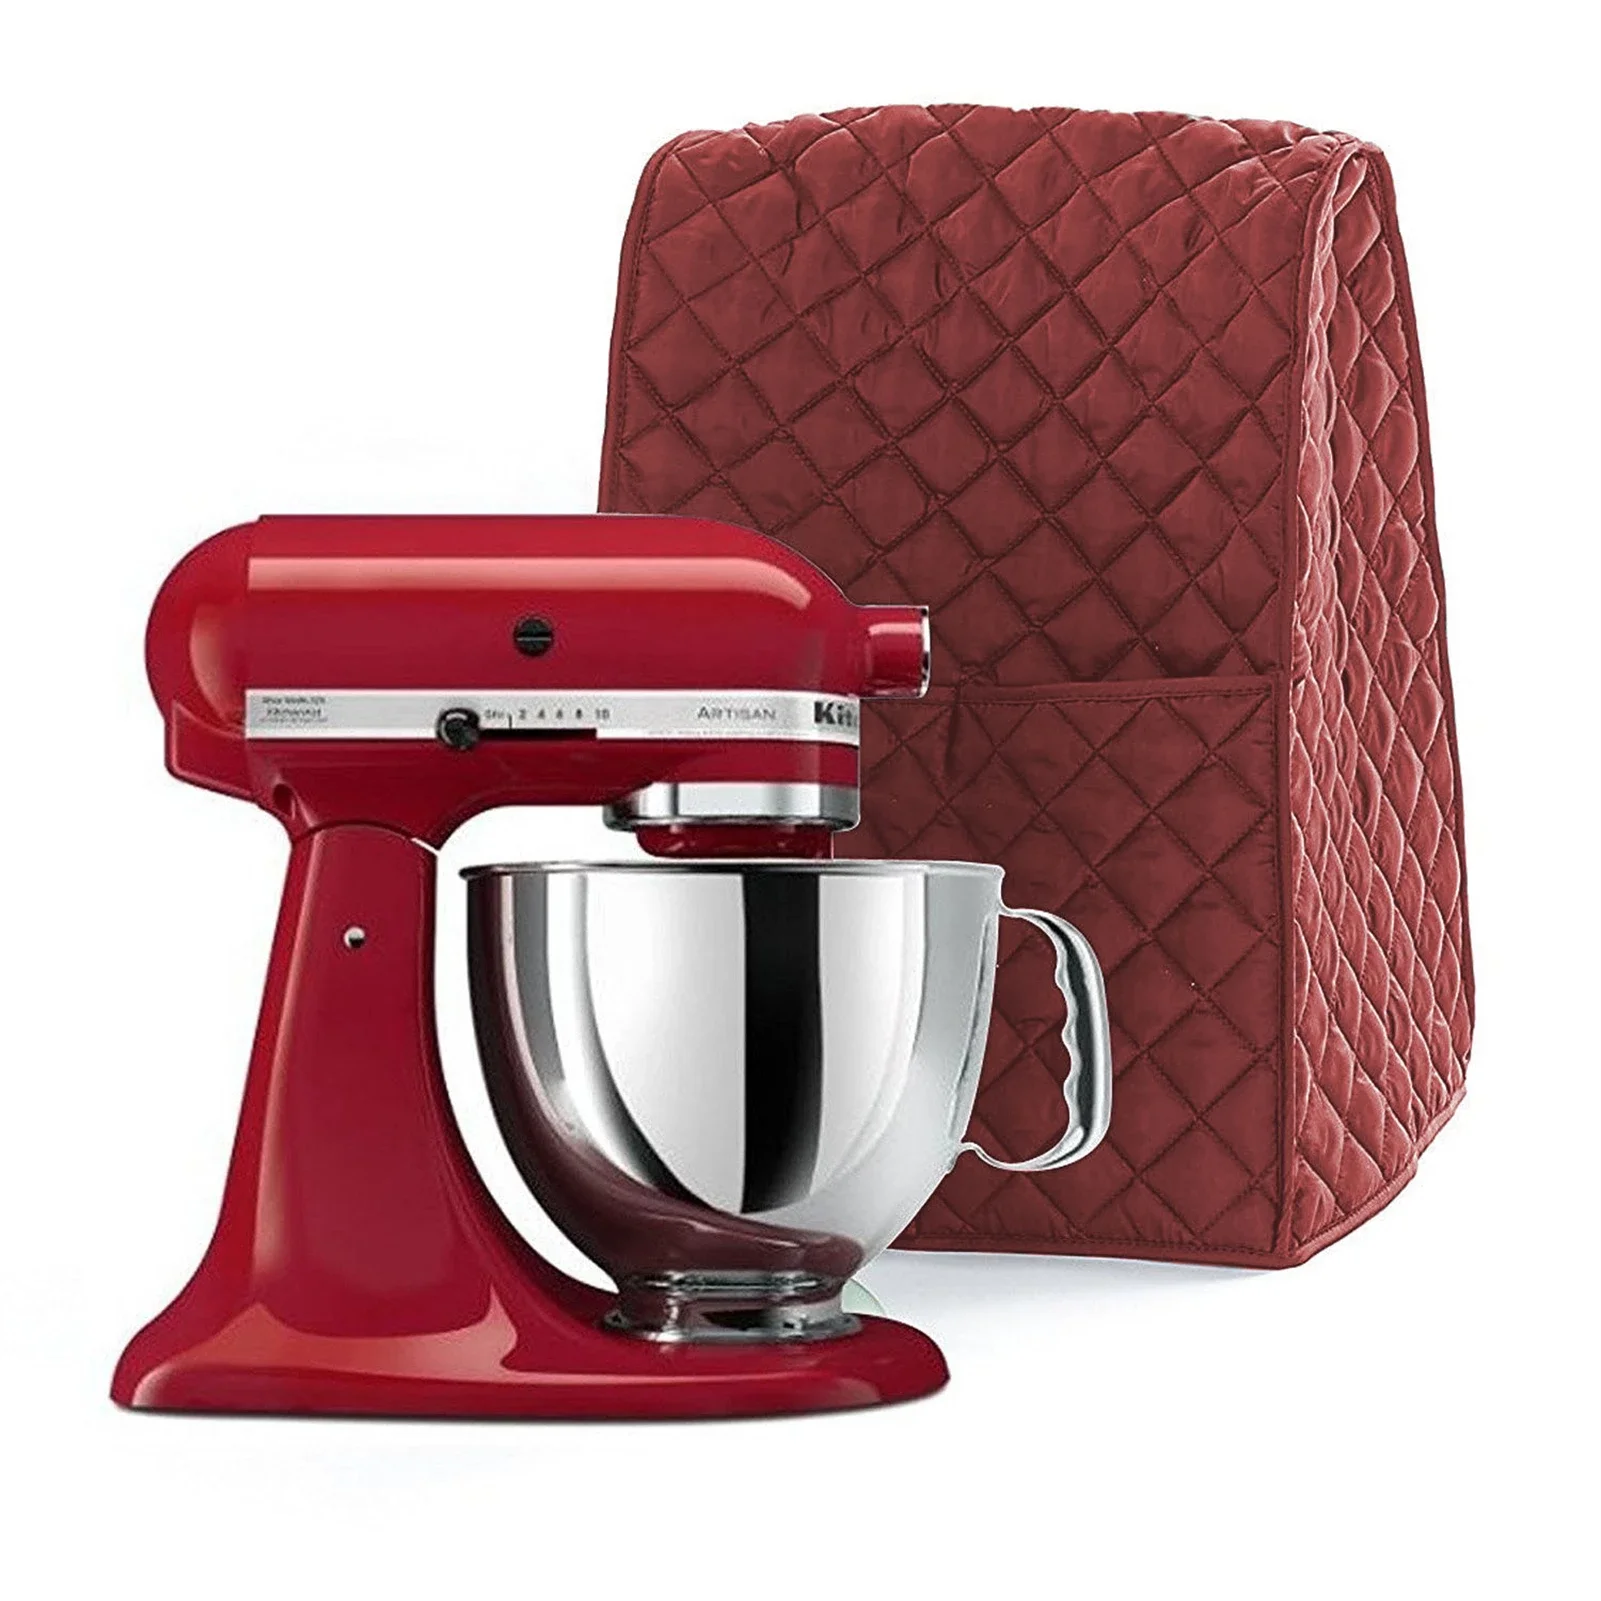 Stand Mixer Dust-proof Cover with Pocket and Organizer Bag for Kitchenaid,Sunbeam,Cuisinart (Black/Coffee/Red)